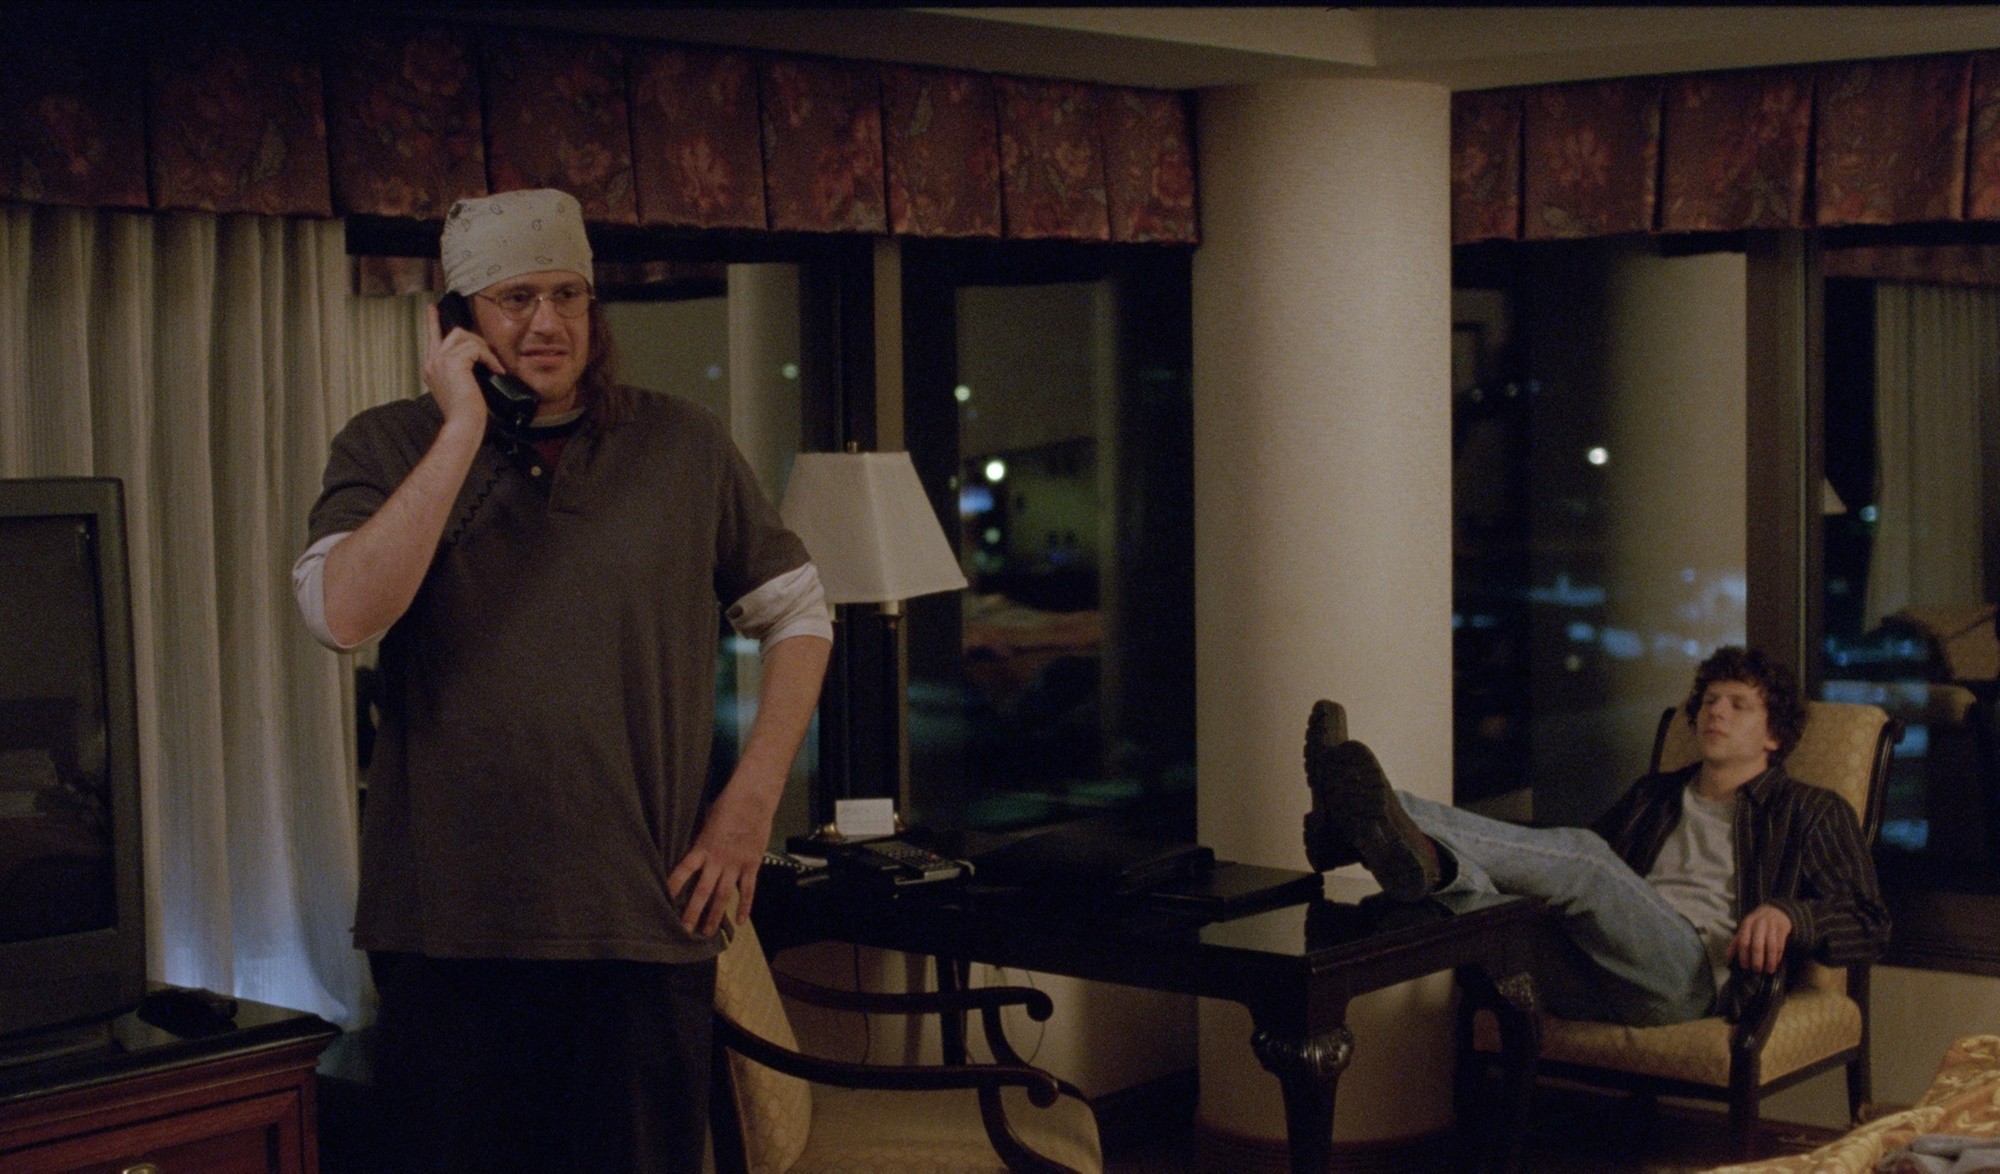 Jason Segel stars as David Foster Wallace and Jesse Eisenberg stars as David Lipsky in A24's The End of the Tour (2015)